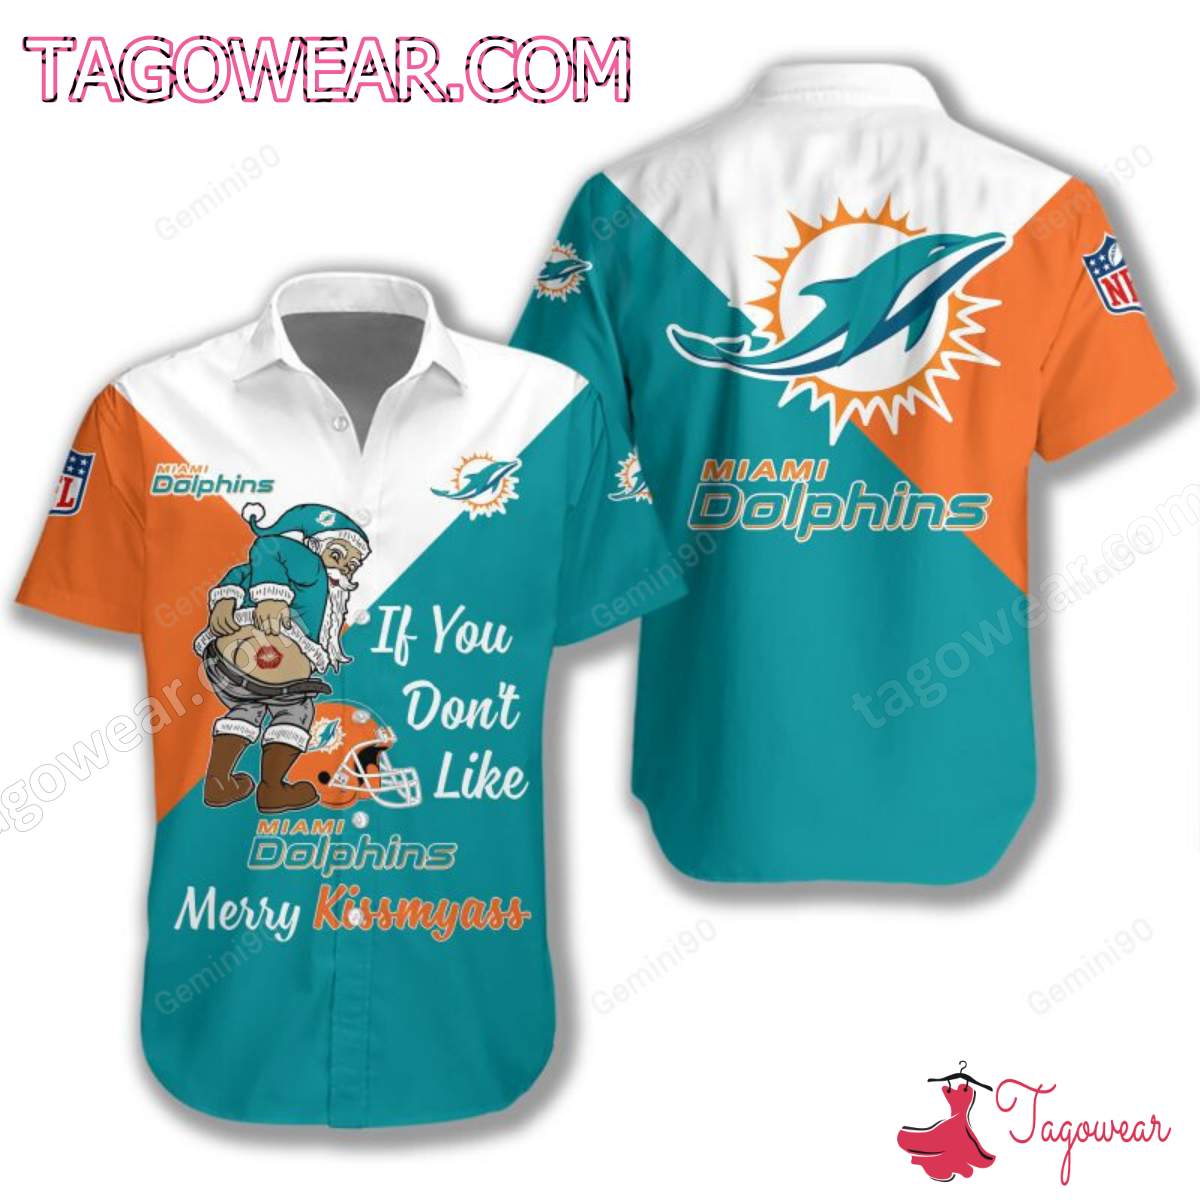 If You Don't Like Miami Dolphins Merry Kissmyass T-shirt, Polo, Hoodie a